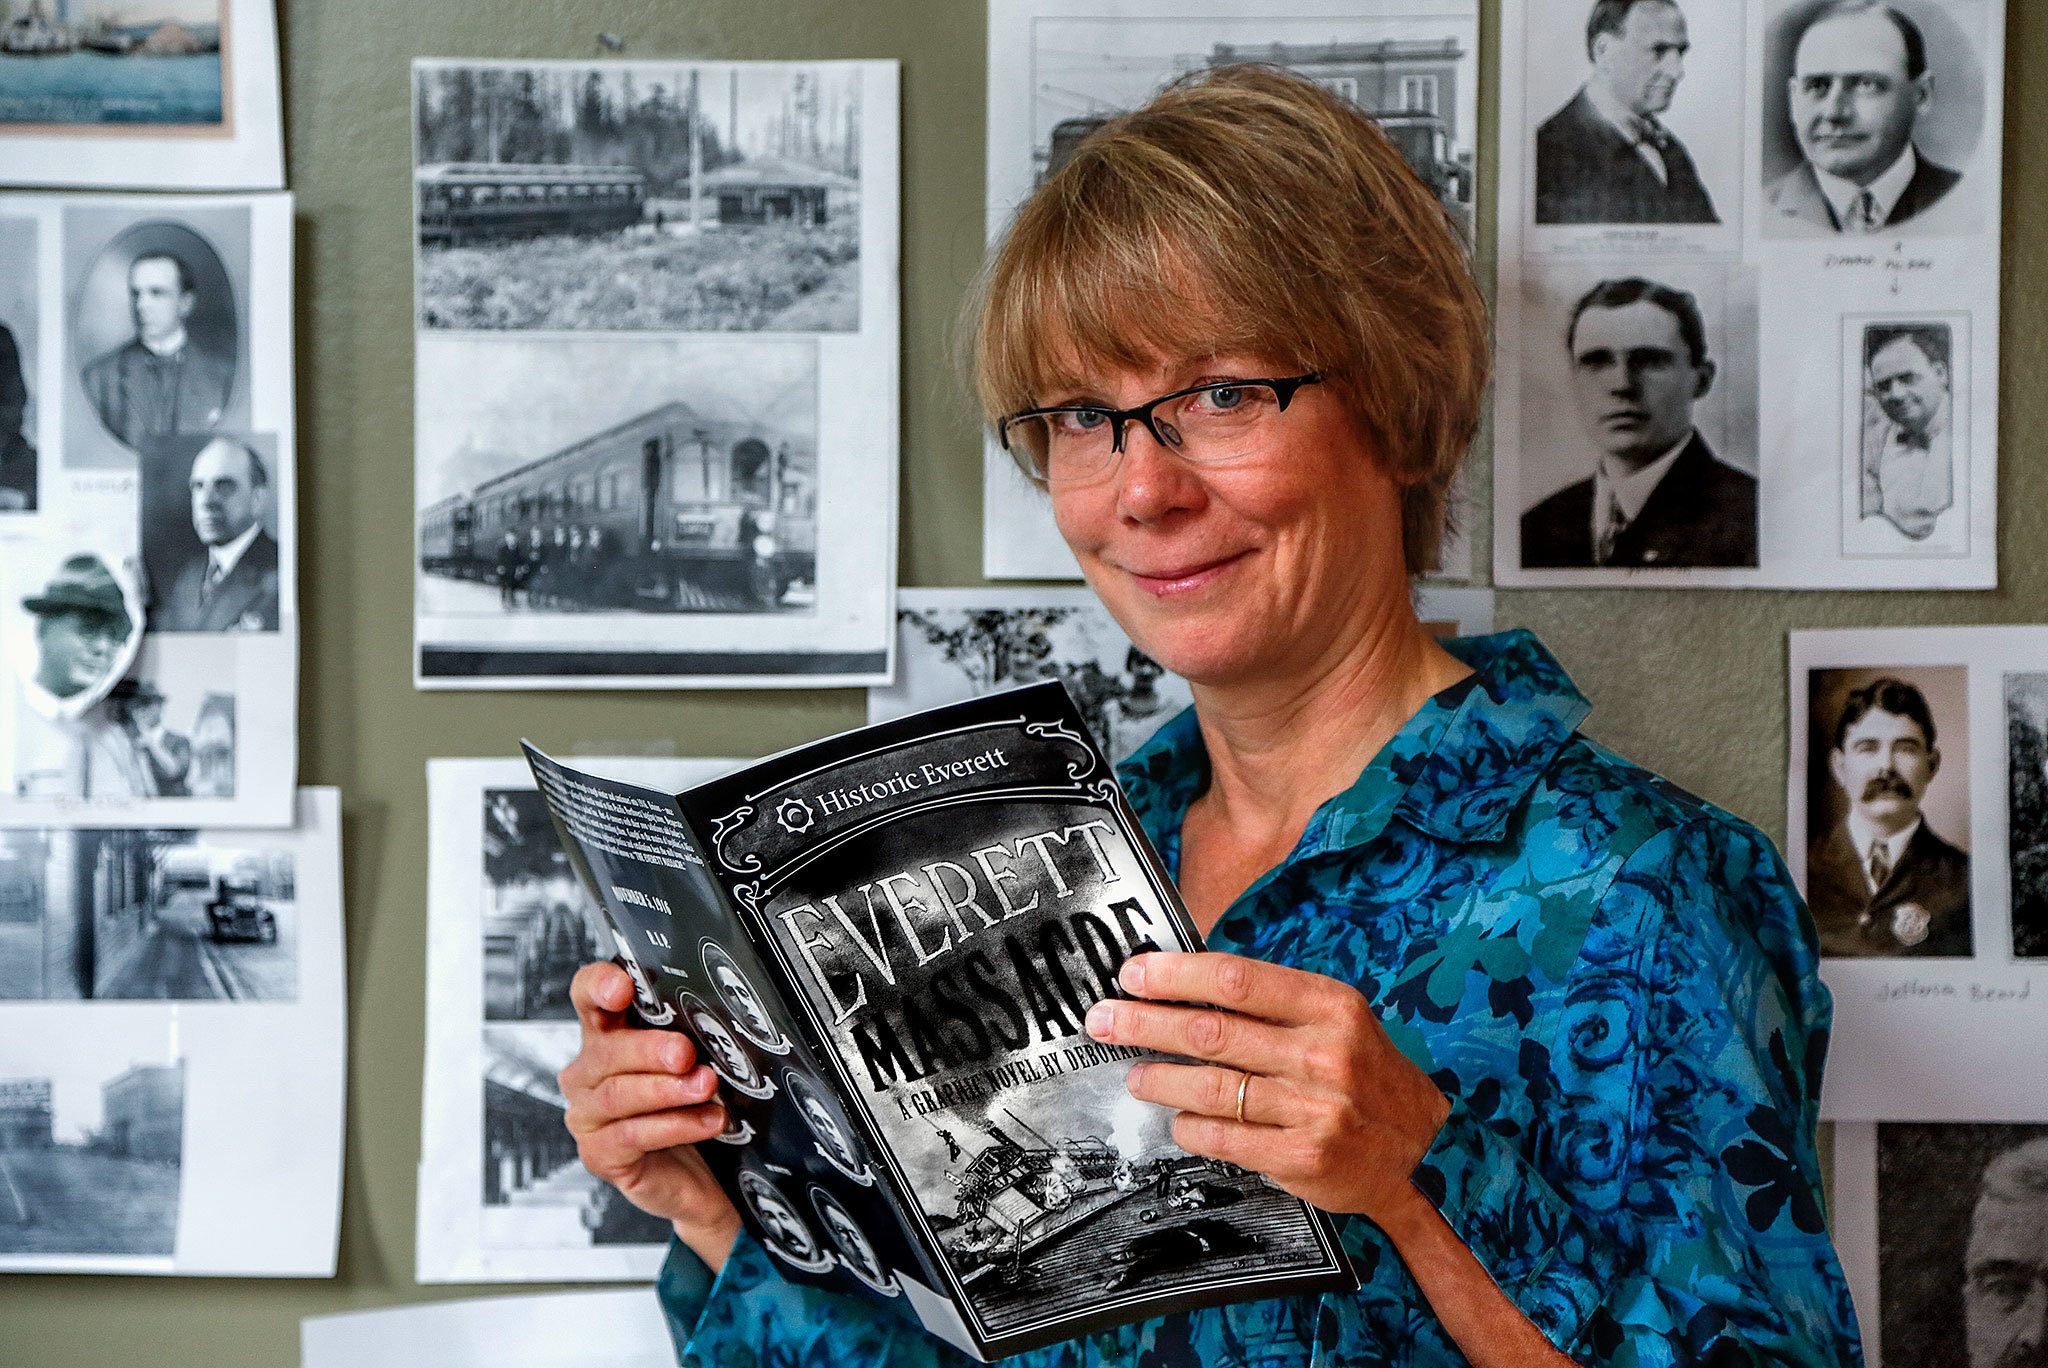 In her home in Everett, artist Deb Fox holds a copy of a new graphic novel she created based on the Everett Massacre. Photocopies of historic photographs hang on her studio wall behind her. She created the art for the graphic novel using charcoal. (Dan Bates / The Herald)